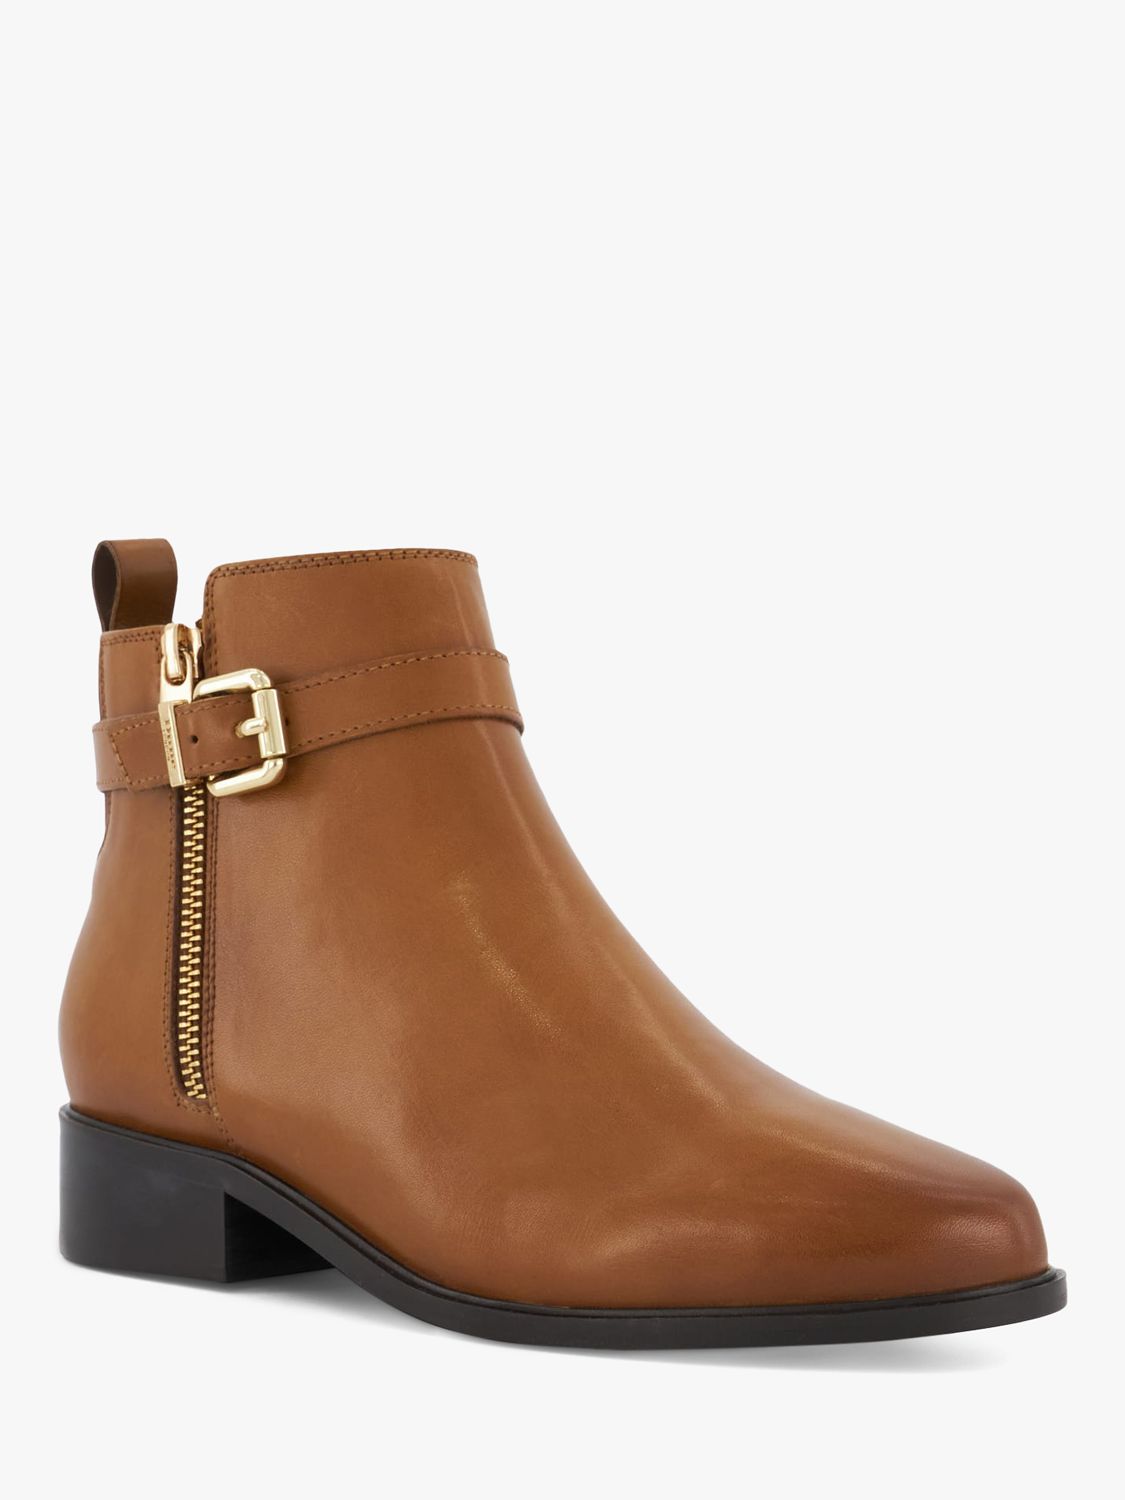 Buy Dune Pepi Leather Ankle Boots Online at johnlewis.com